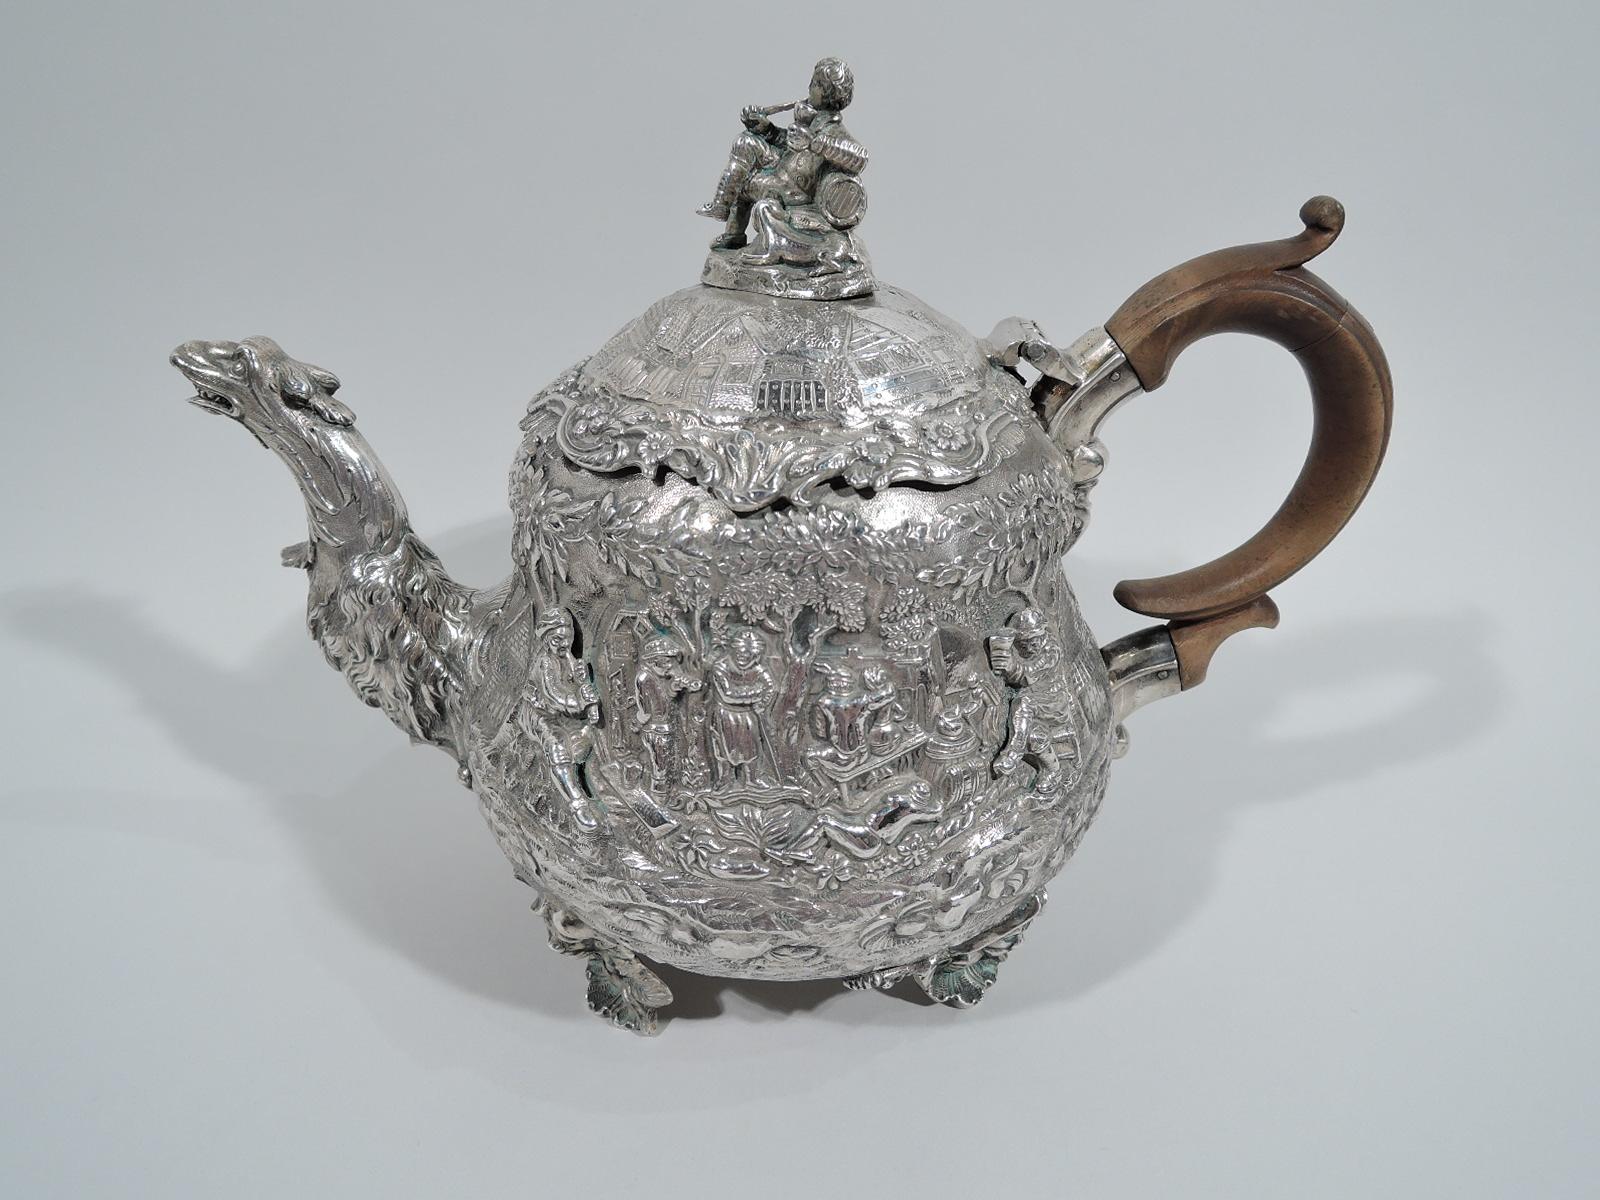 George IV sterling silver tea set. Made by Edward Farrell in London in 1822-1823. This set comprises 3 pieces: Teapot, creamer, and sugar.

Teapot has squat baluster body. Cover hinged, domed, and overhanging. S-scroll spout in form of shaggy,